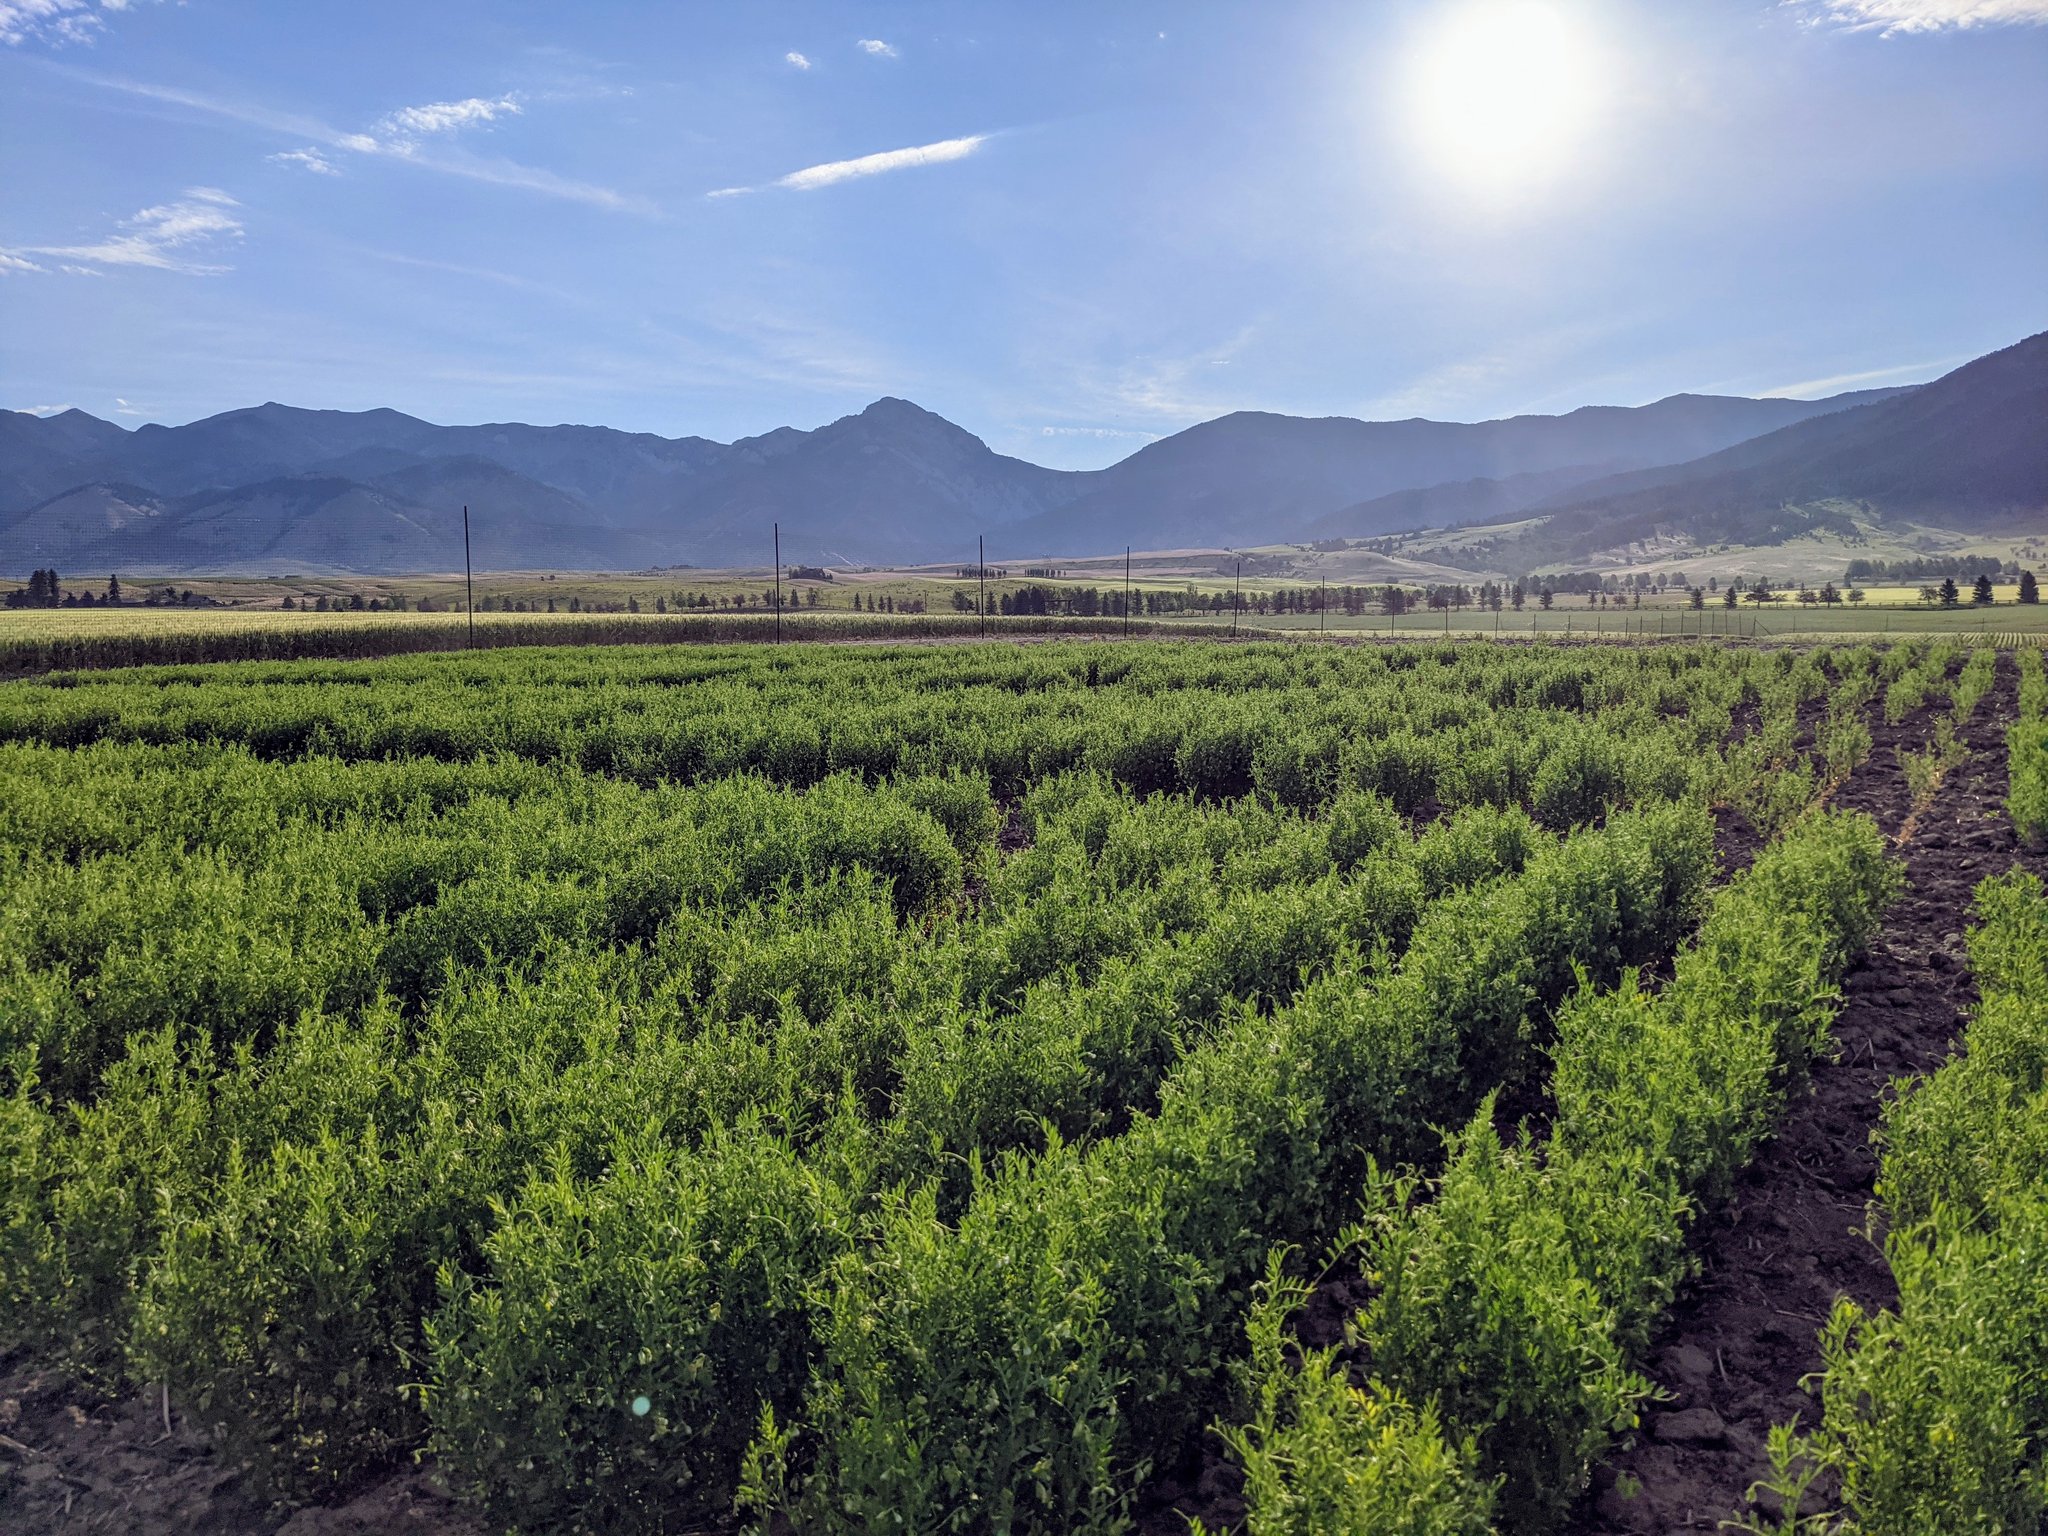 Photo of the 2021 lentil study field with mountains in the background